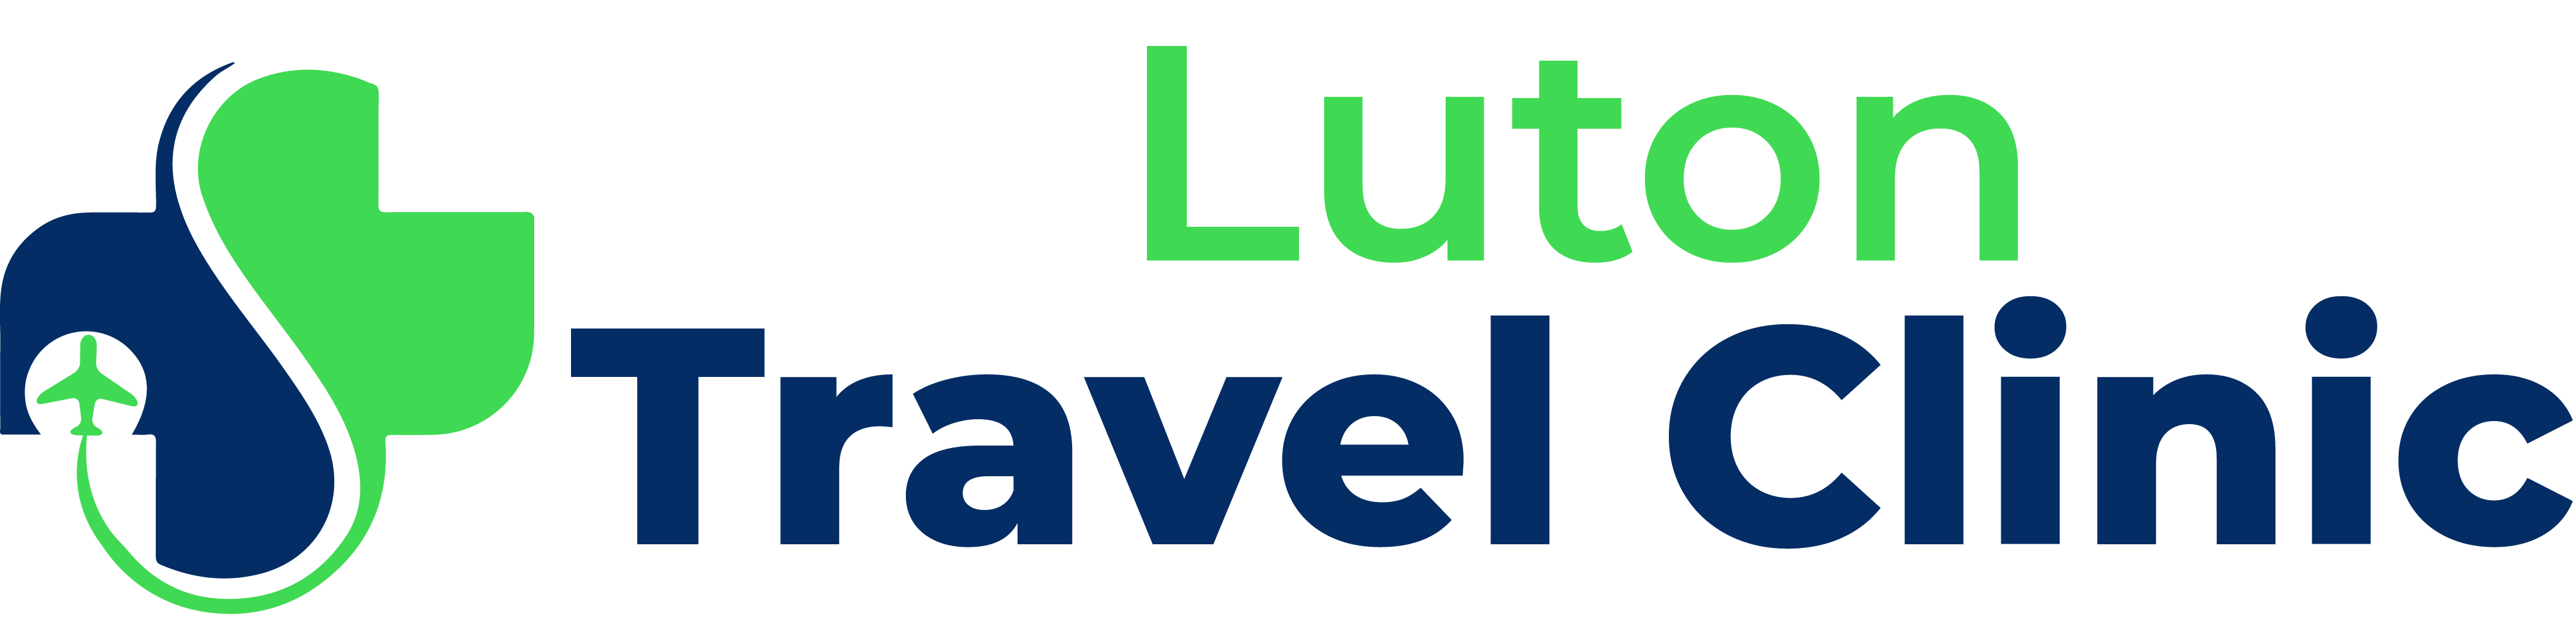 Vaccines Prices - Travel Clinic Luton